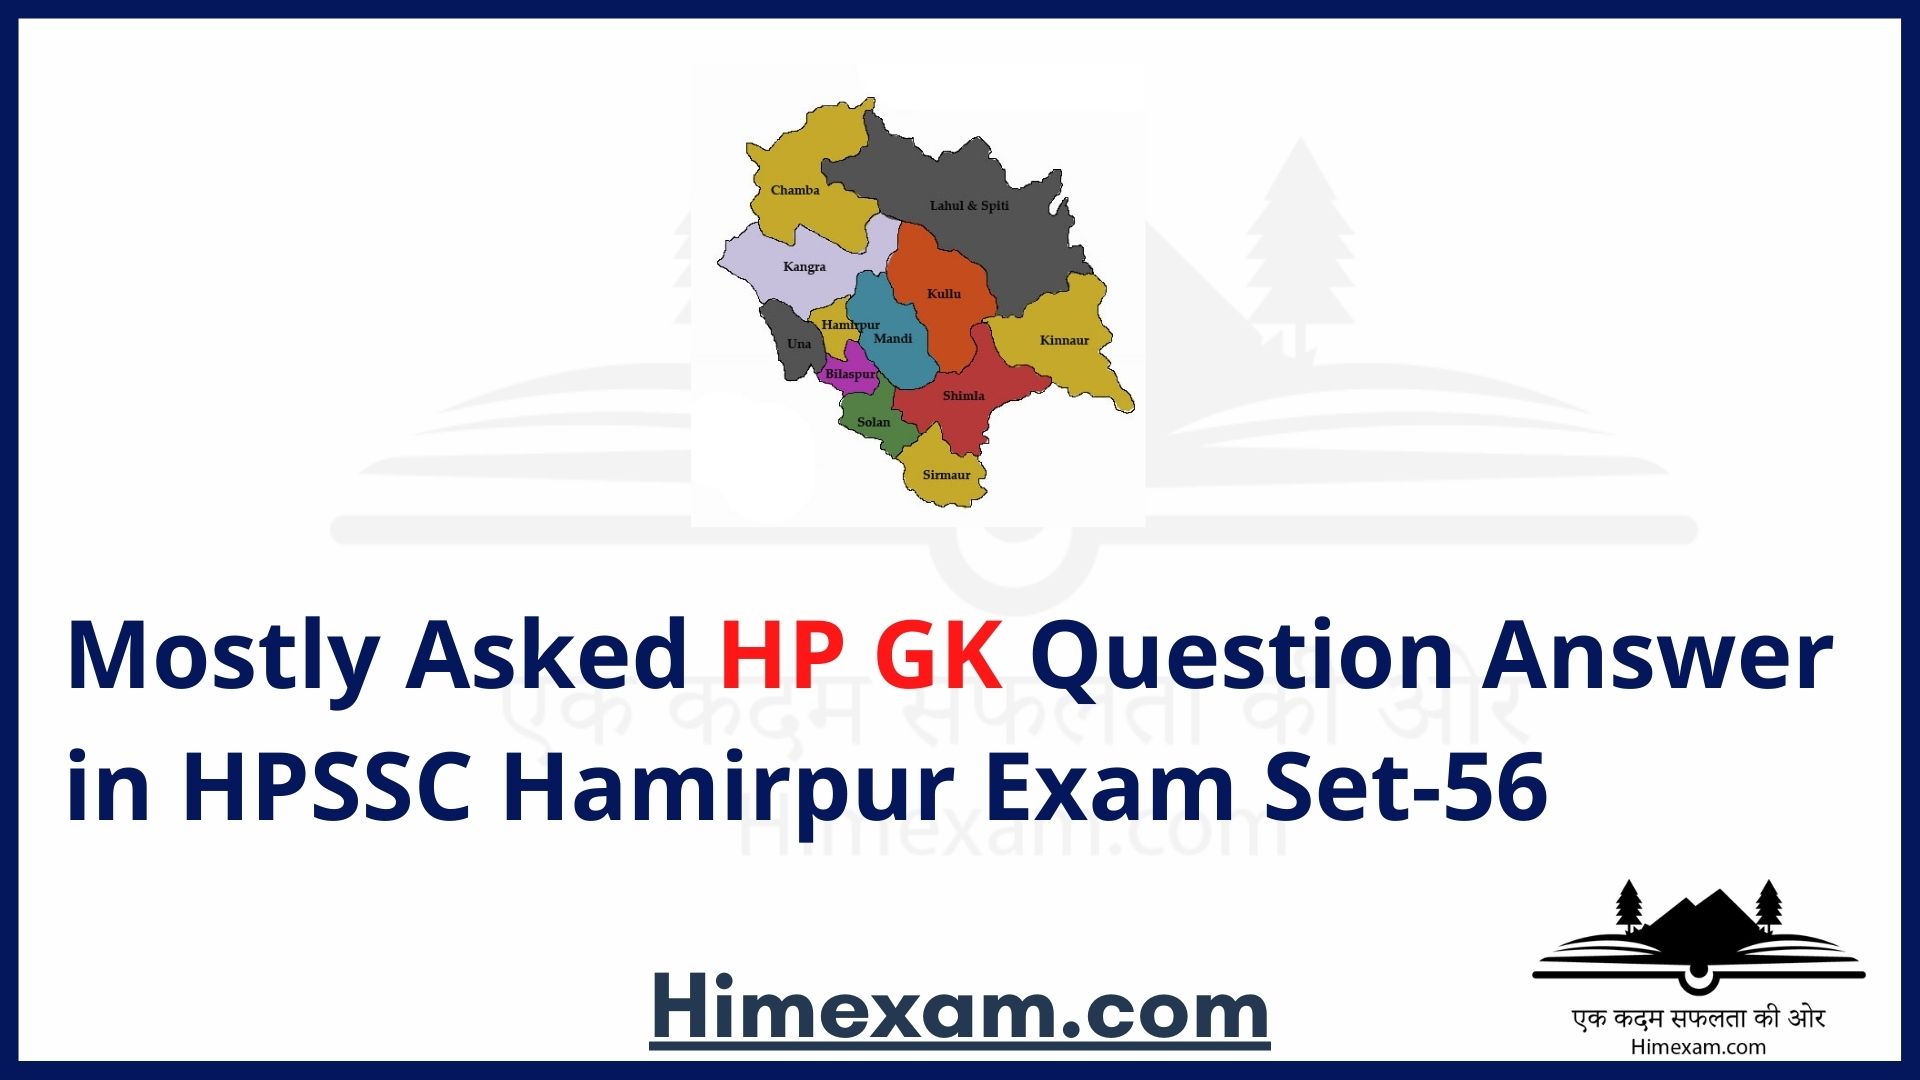 Mostly Asked HP GK Question Answer in HPSSC Hamirpur Exam Set-56